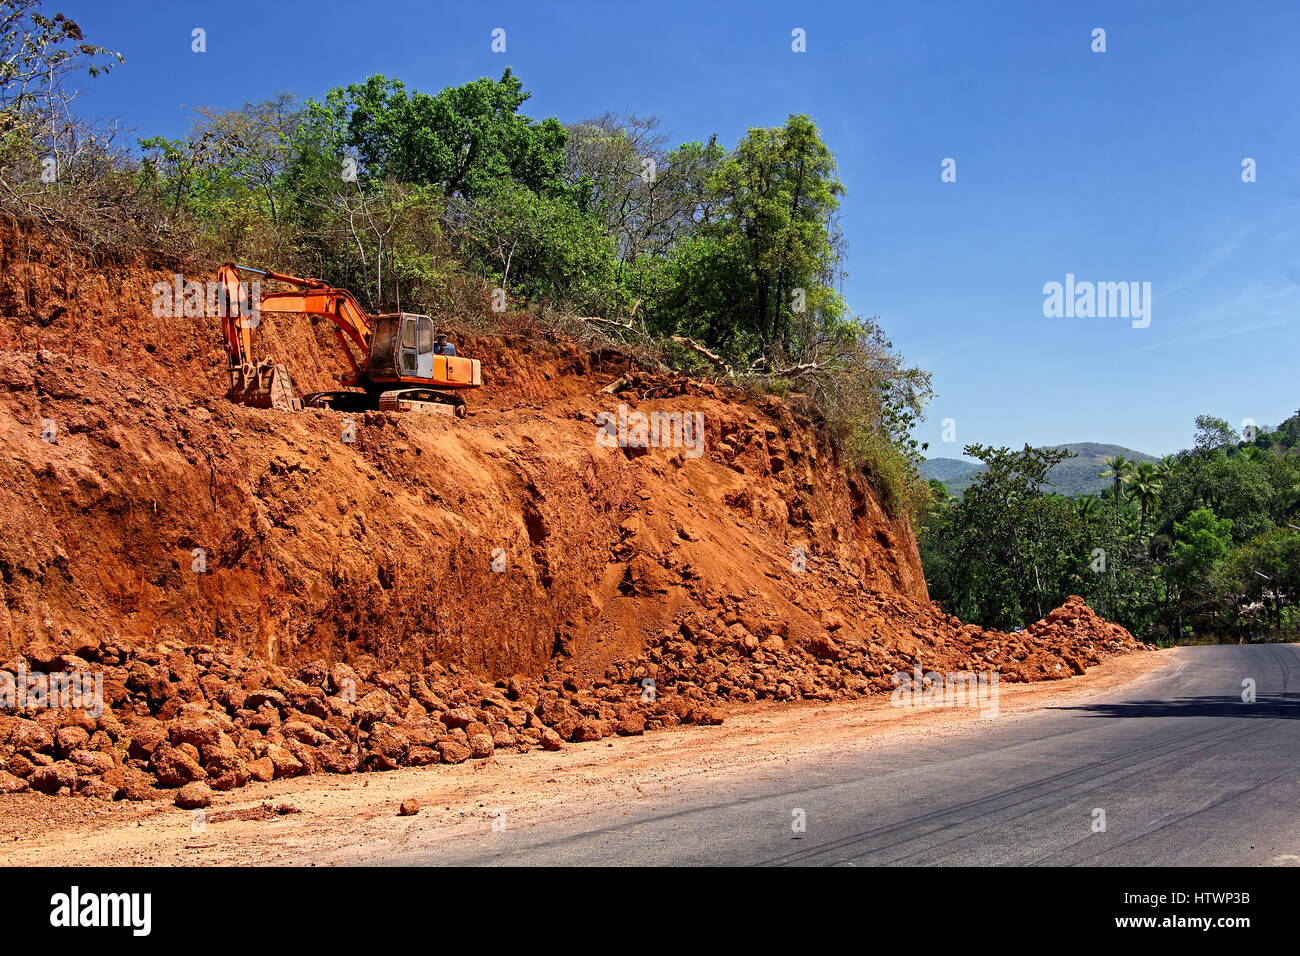 Massive earth cutting using heavy construction and earthmoving hydraulic equipment being done for widening highway in a hilly terrain Stock Photo